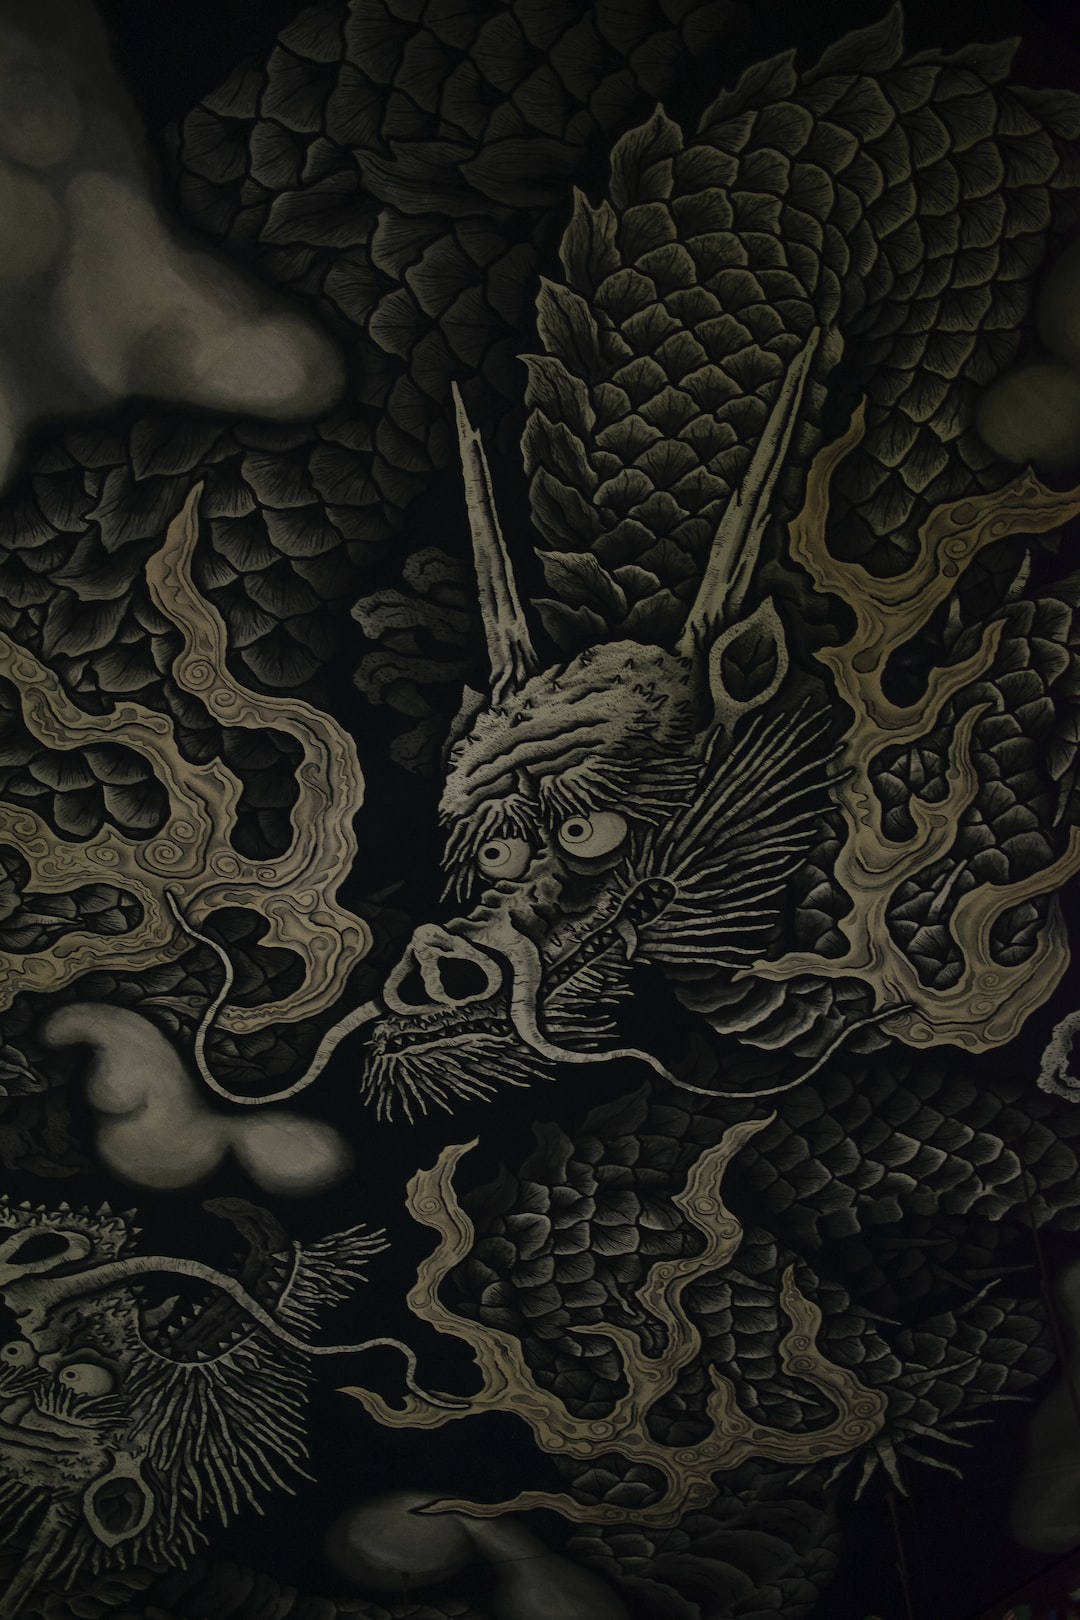 An art of dragons on a ceil in Kyoto, Japan